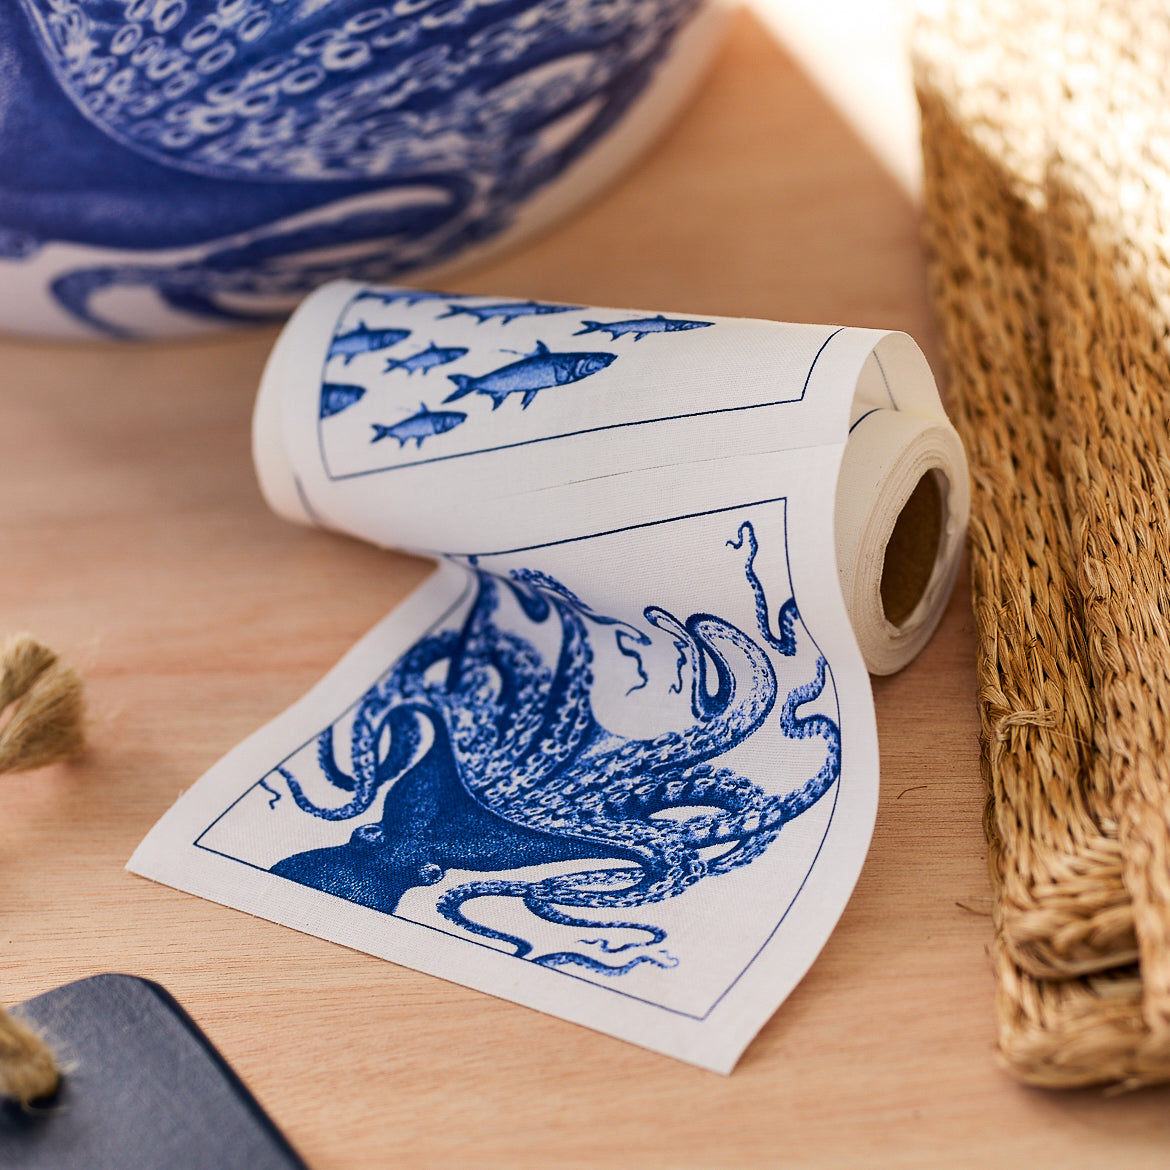 A roll of decorative paper napkins with blue prints of an octopus and fish, placed on a wooden surface next to woven and black items, pairs beautifully with the chic Host With the Most Bundle from Caskata.